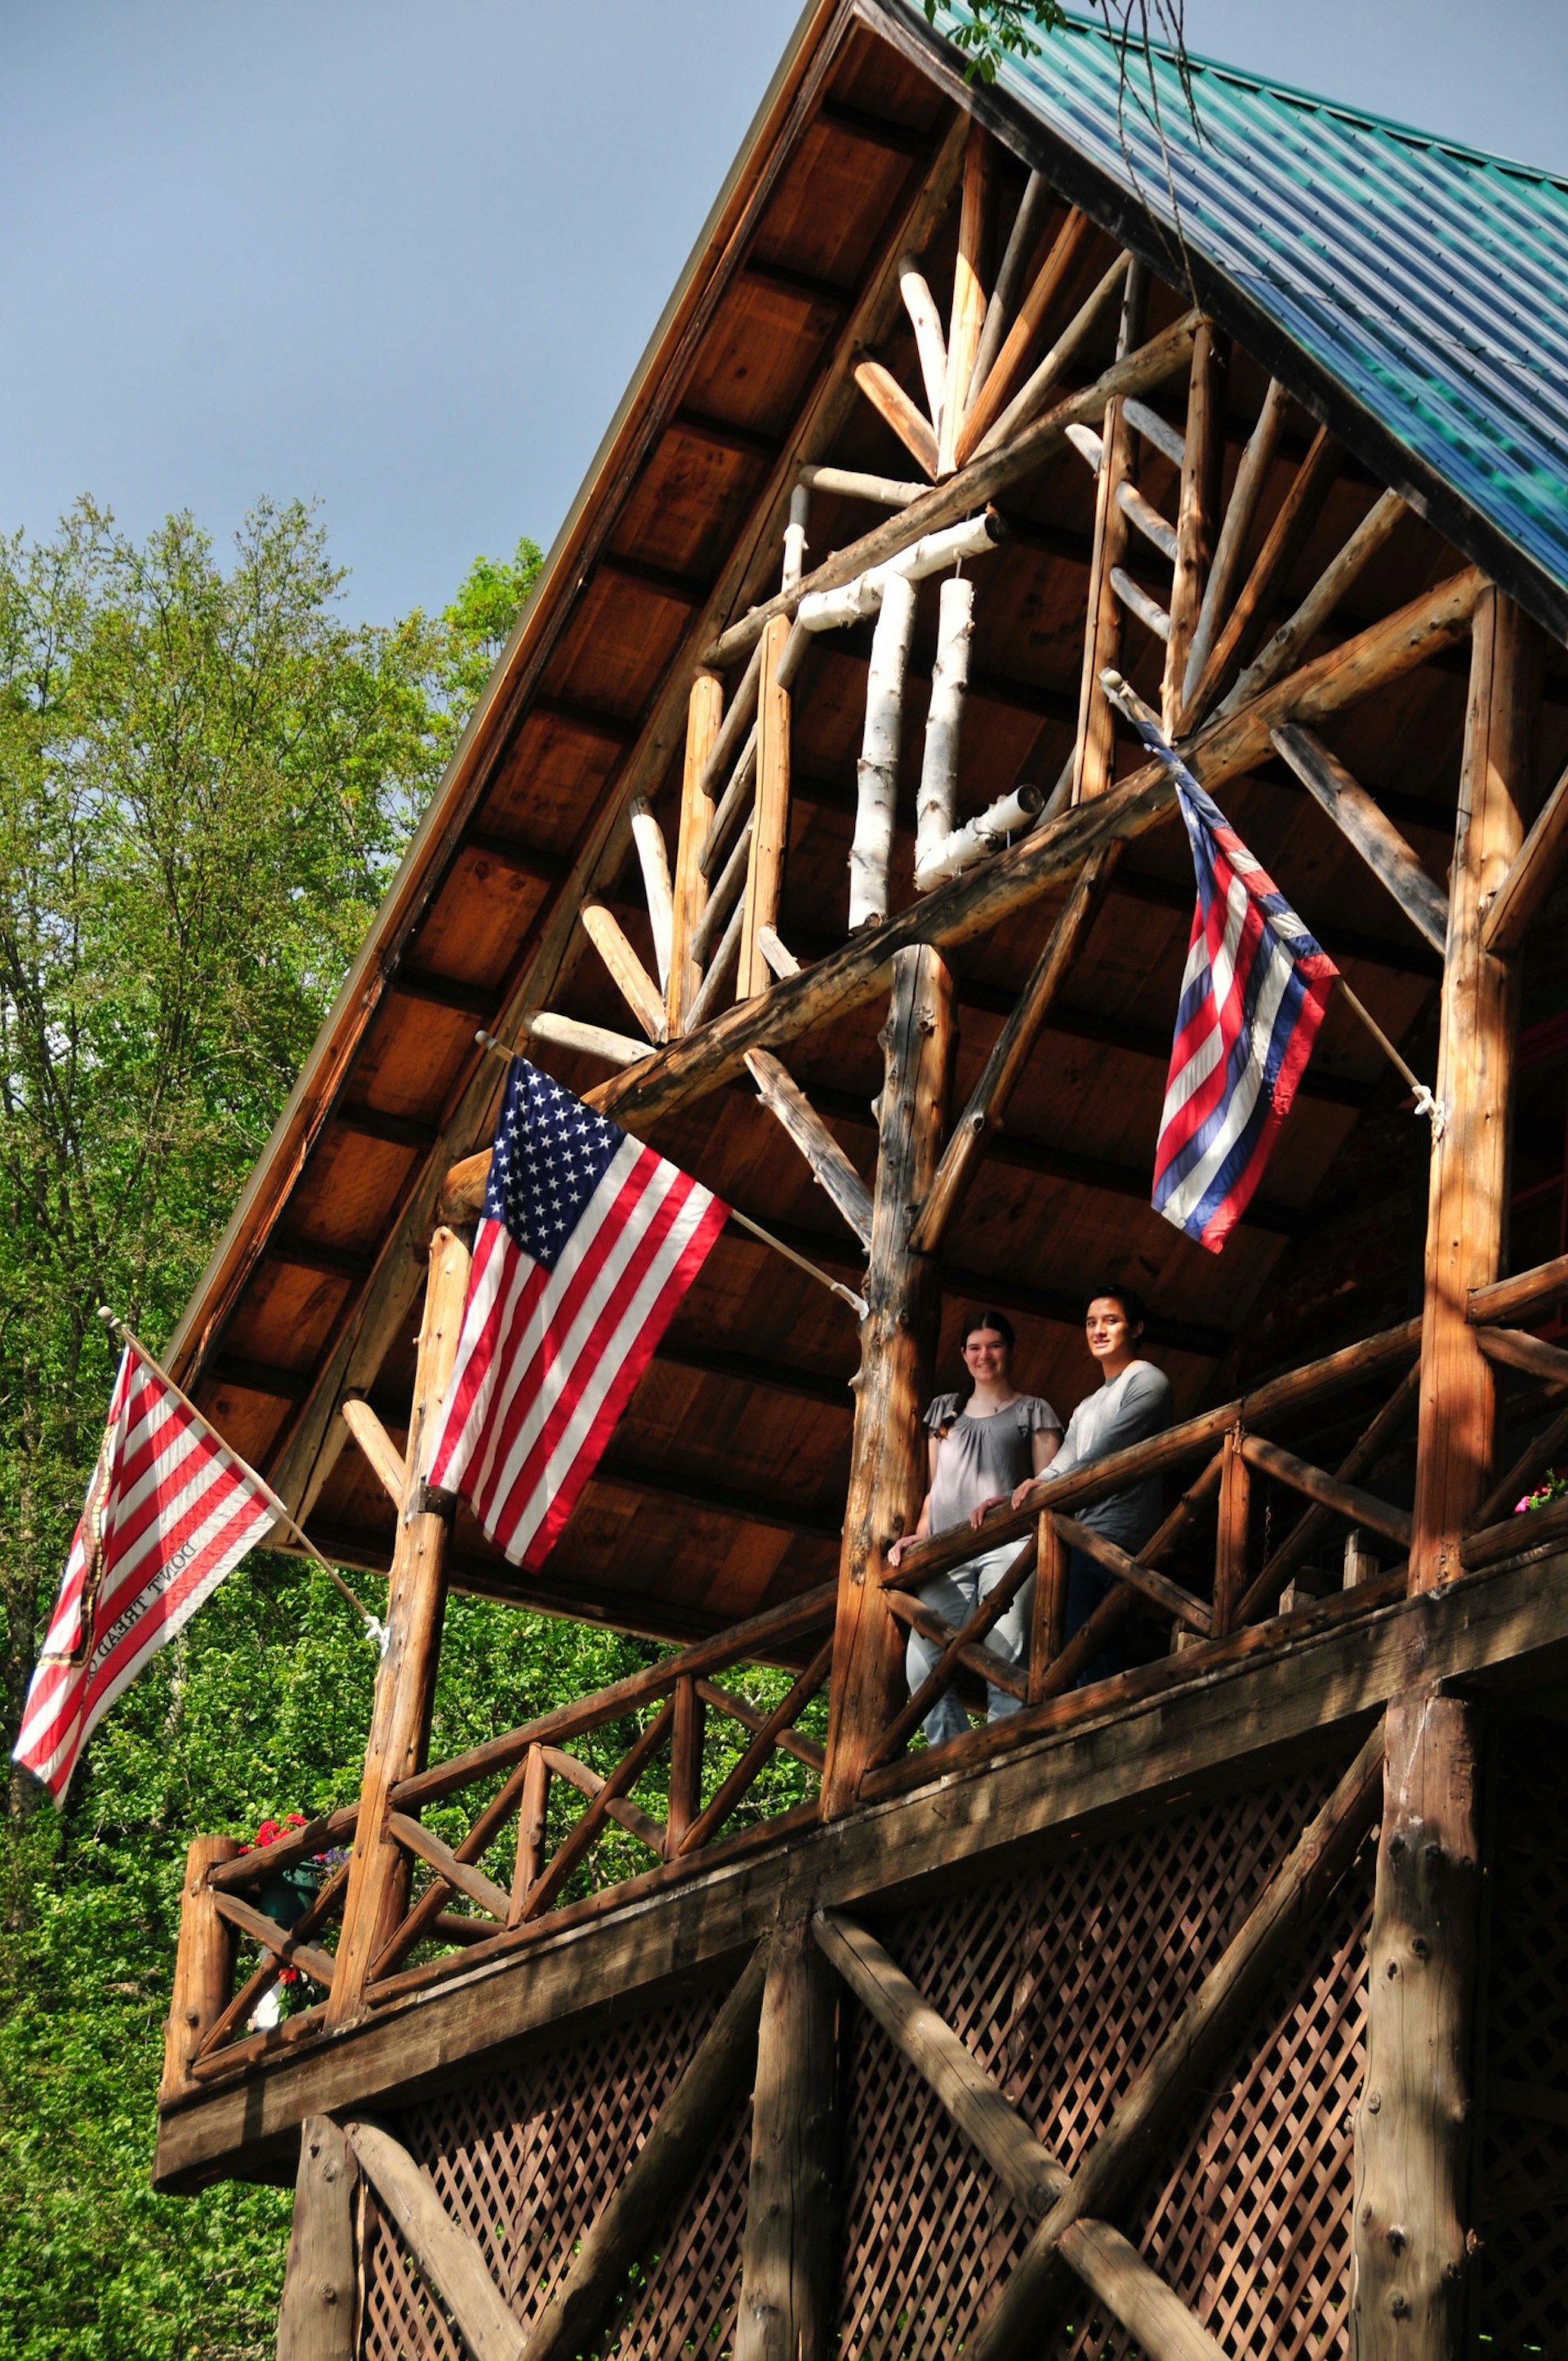 Two people look down from the balcony of a log cabin